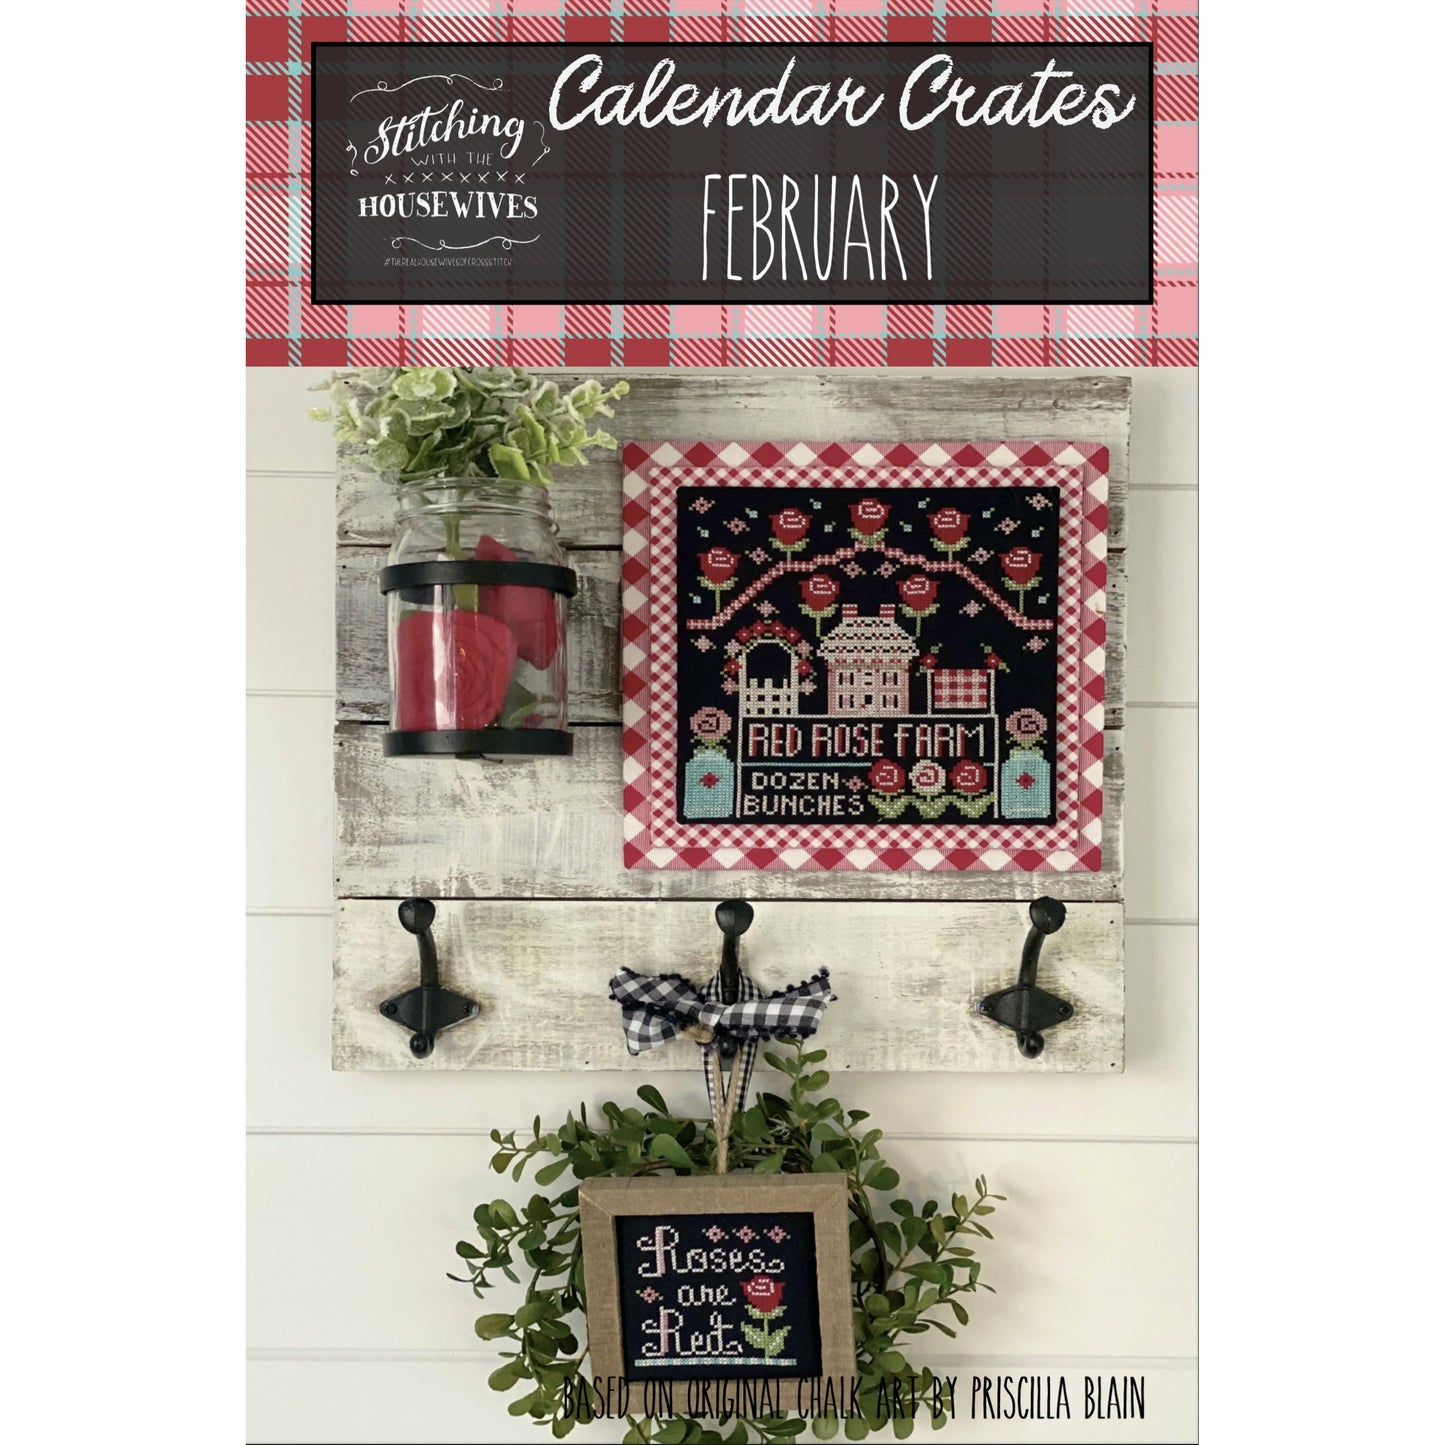 Stitching Housewives ~ Calendar Crates ~ February Pattern